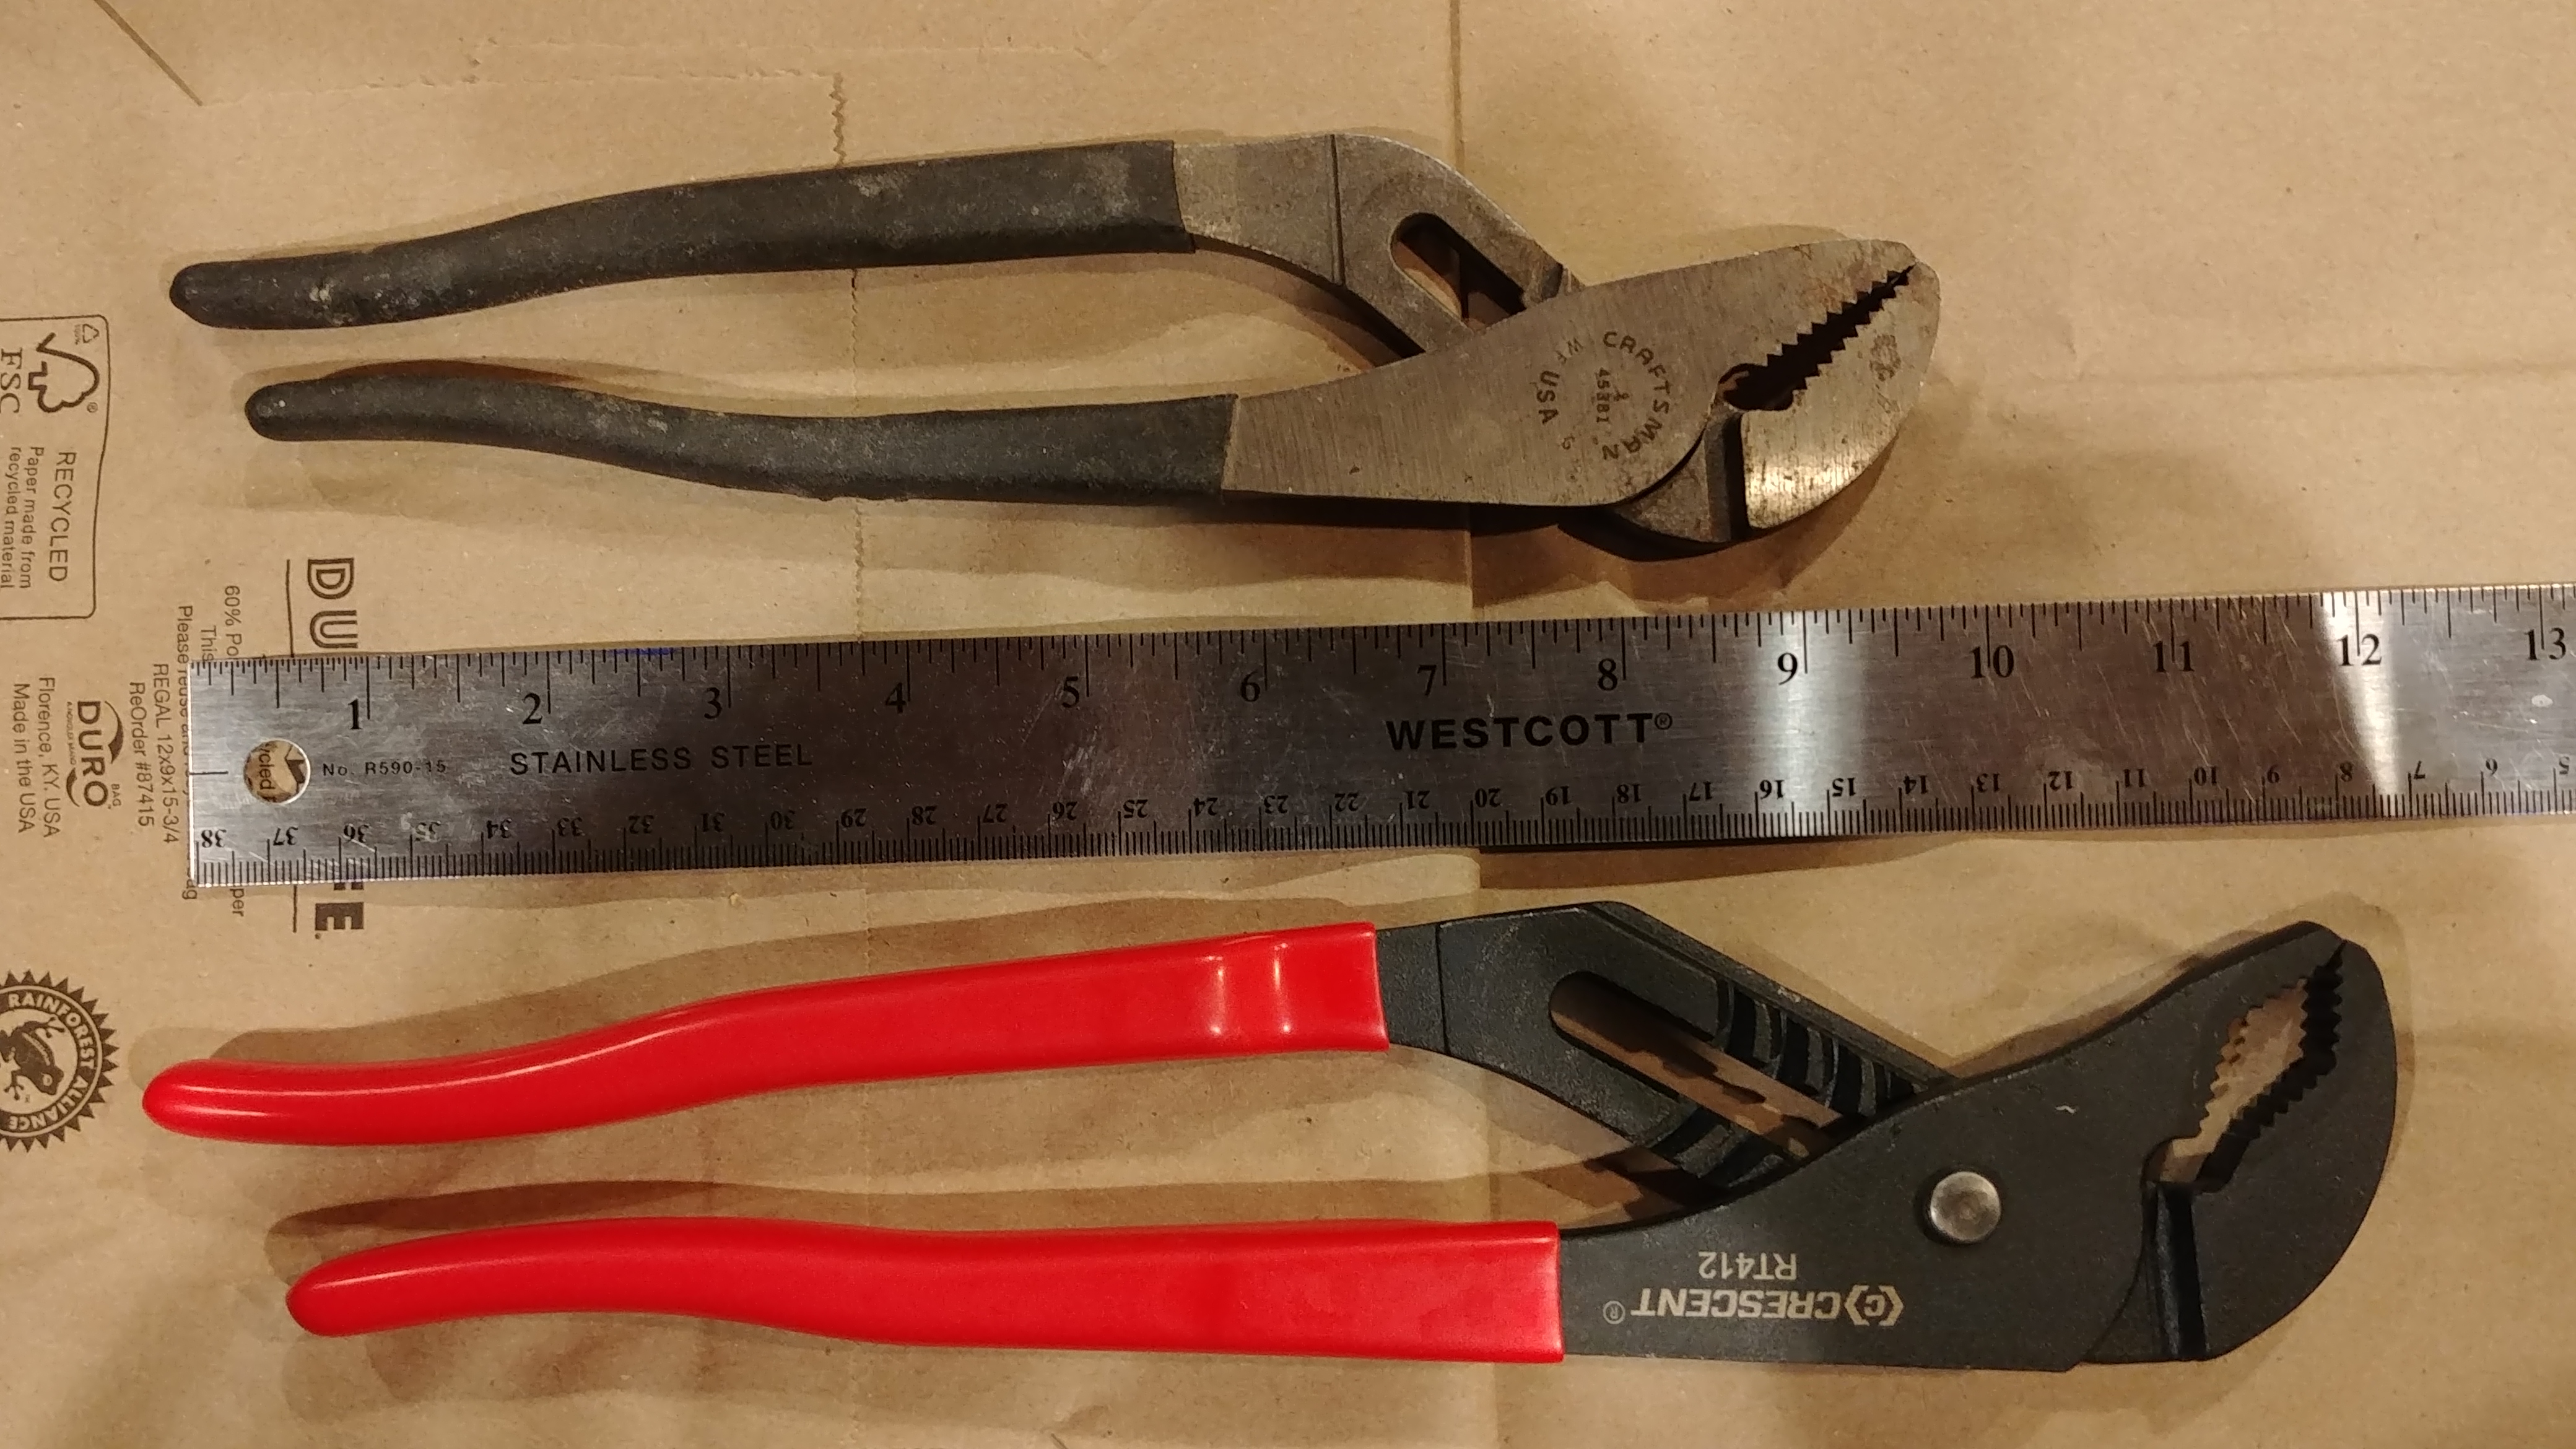 Should I upgrade my tongue & groove pliers?